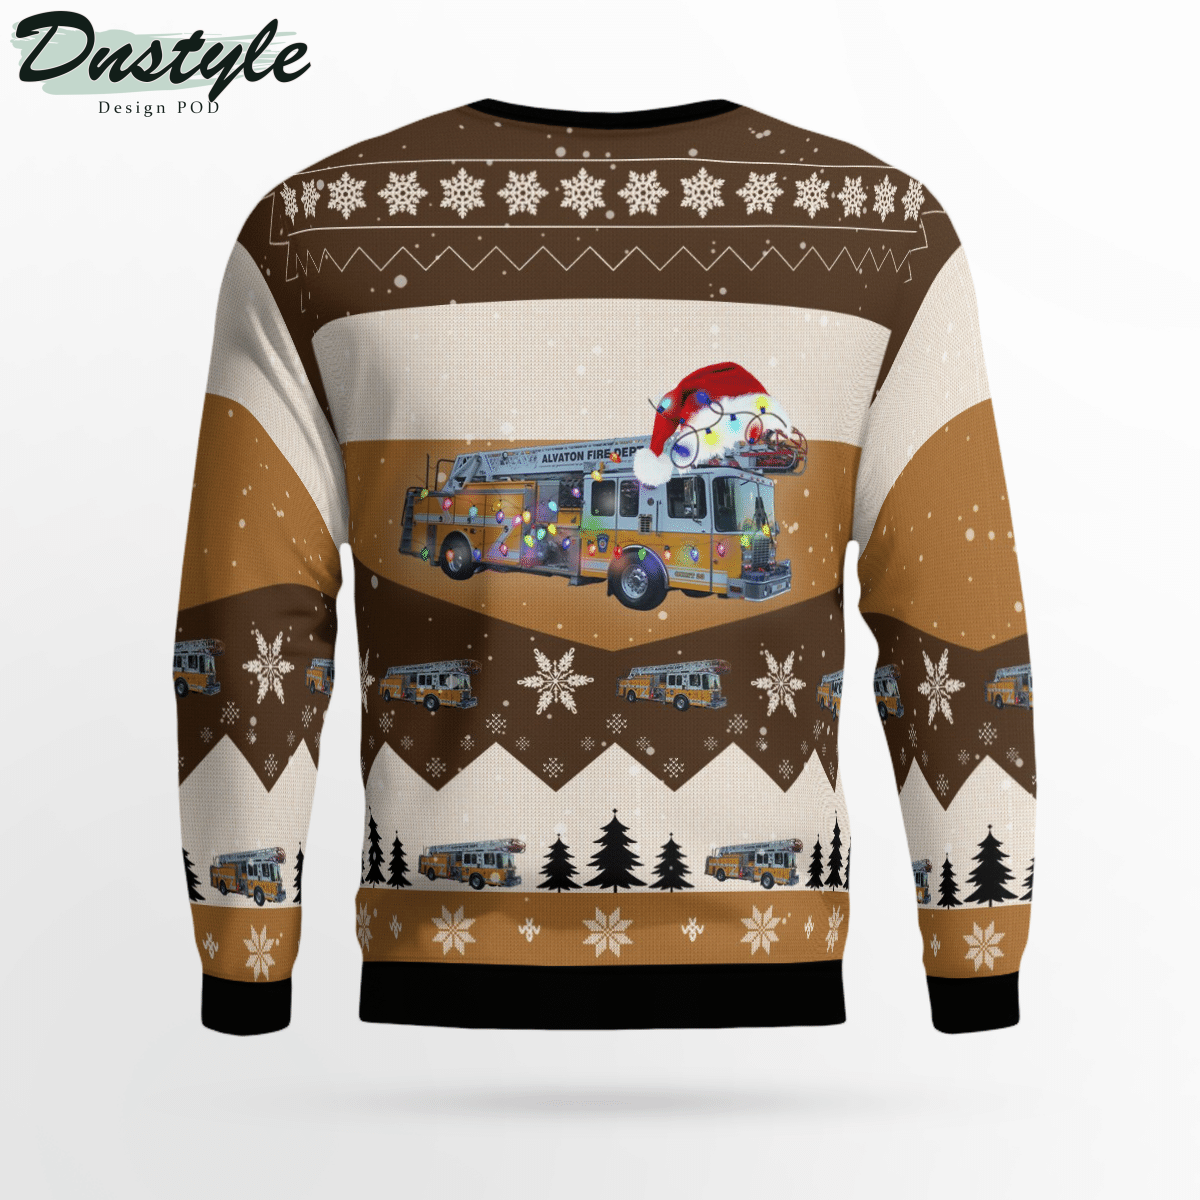 Alvaton Fire Department Ugly Christmas Sweater